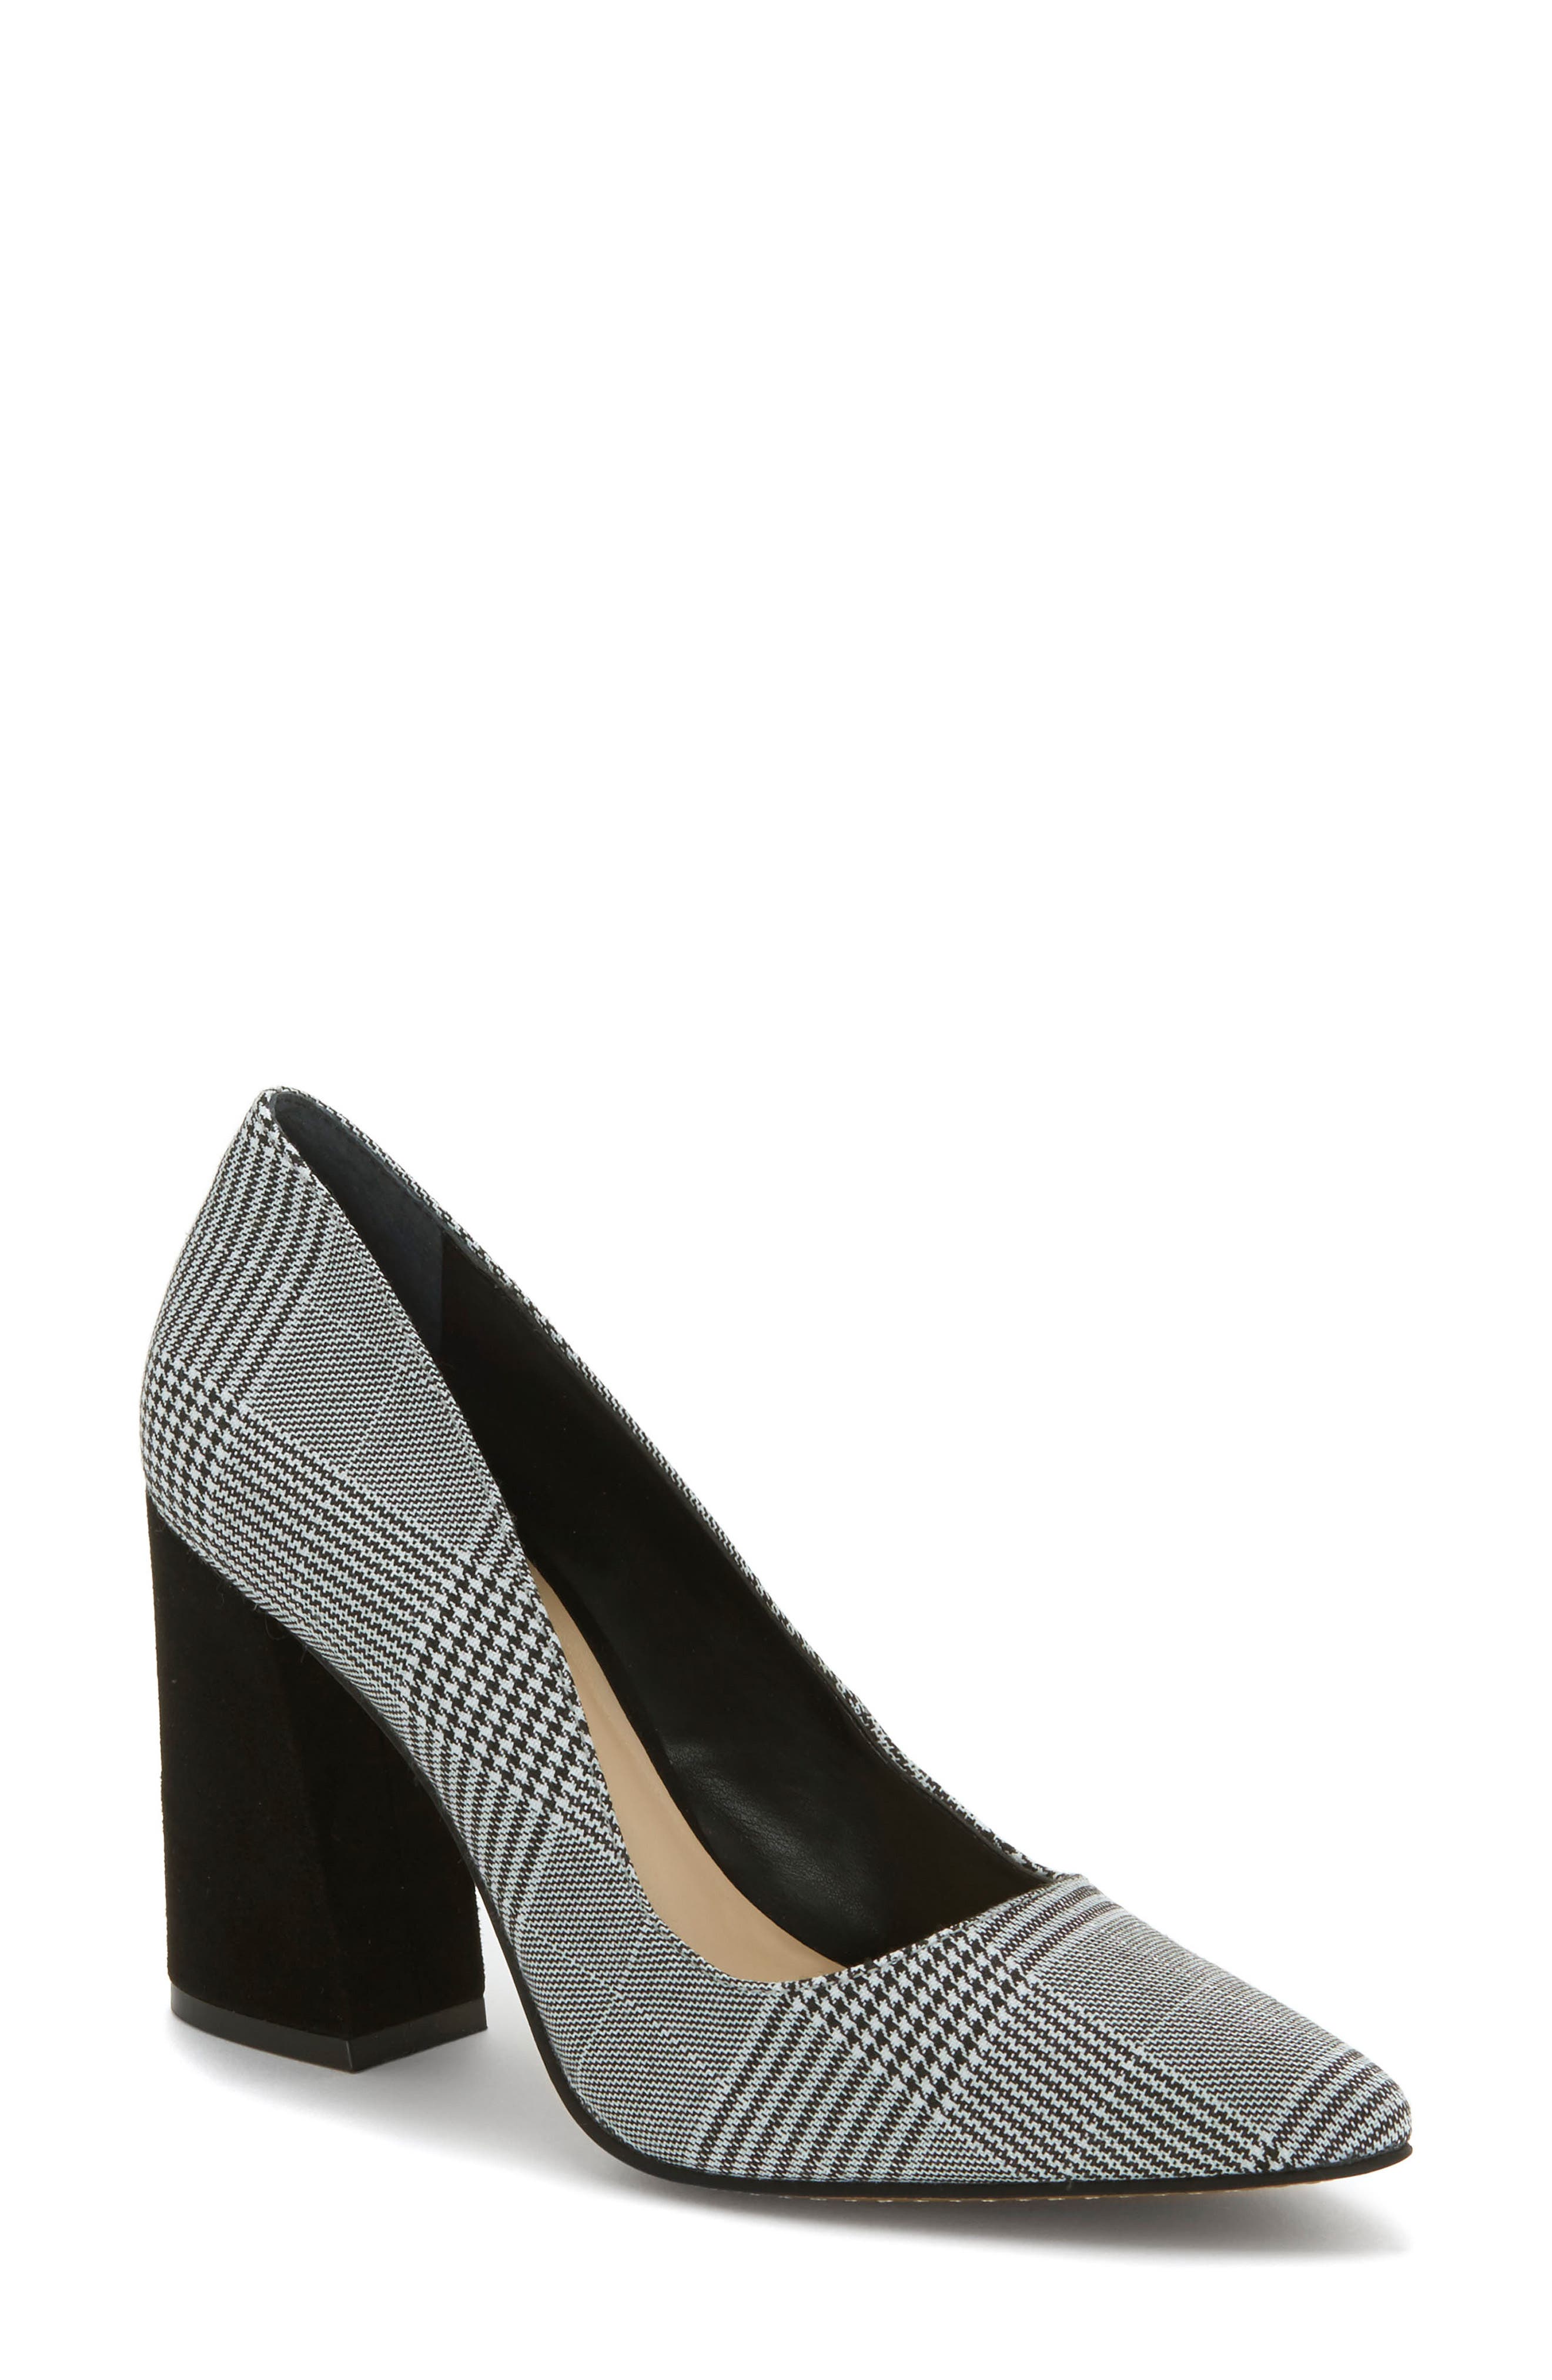 Vince Camuto | Talise Pointy Toe Pump 